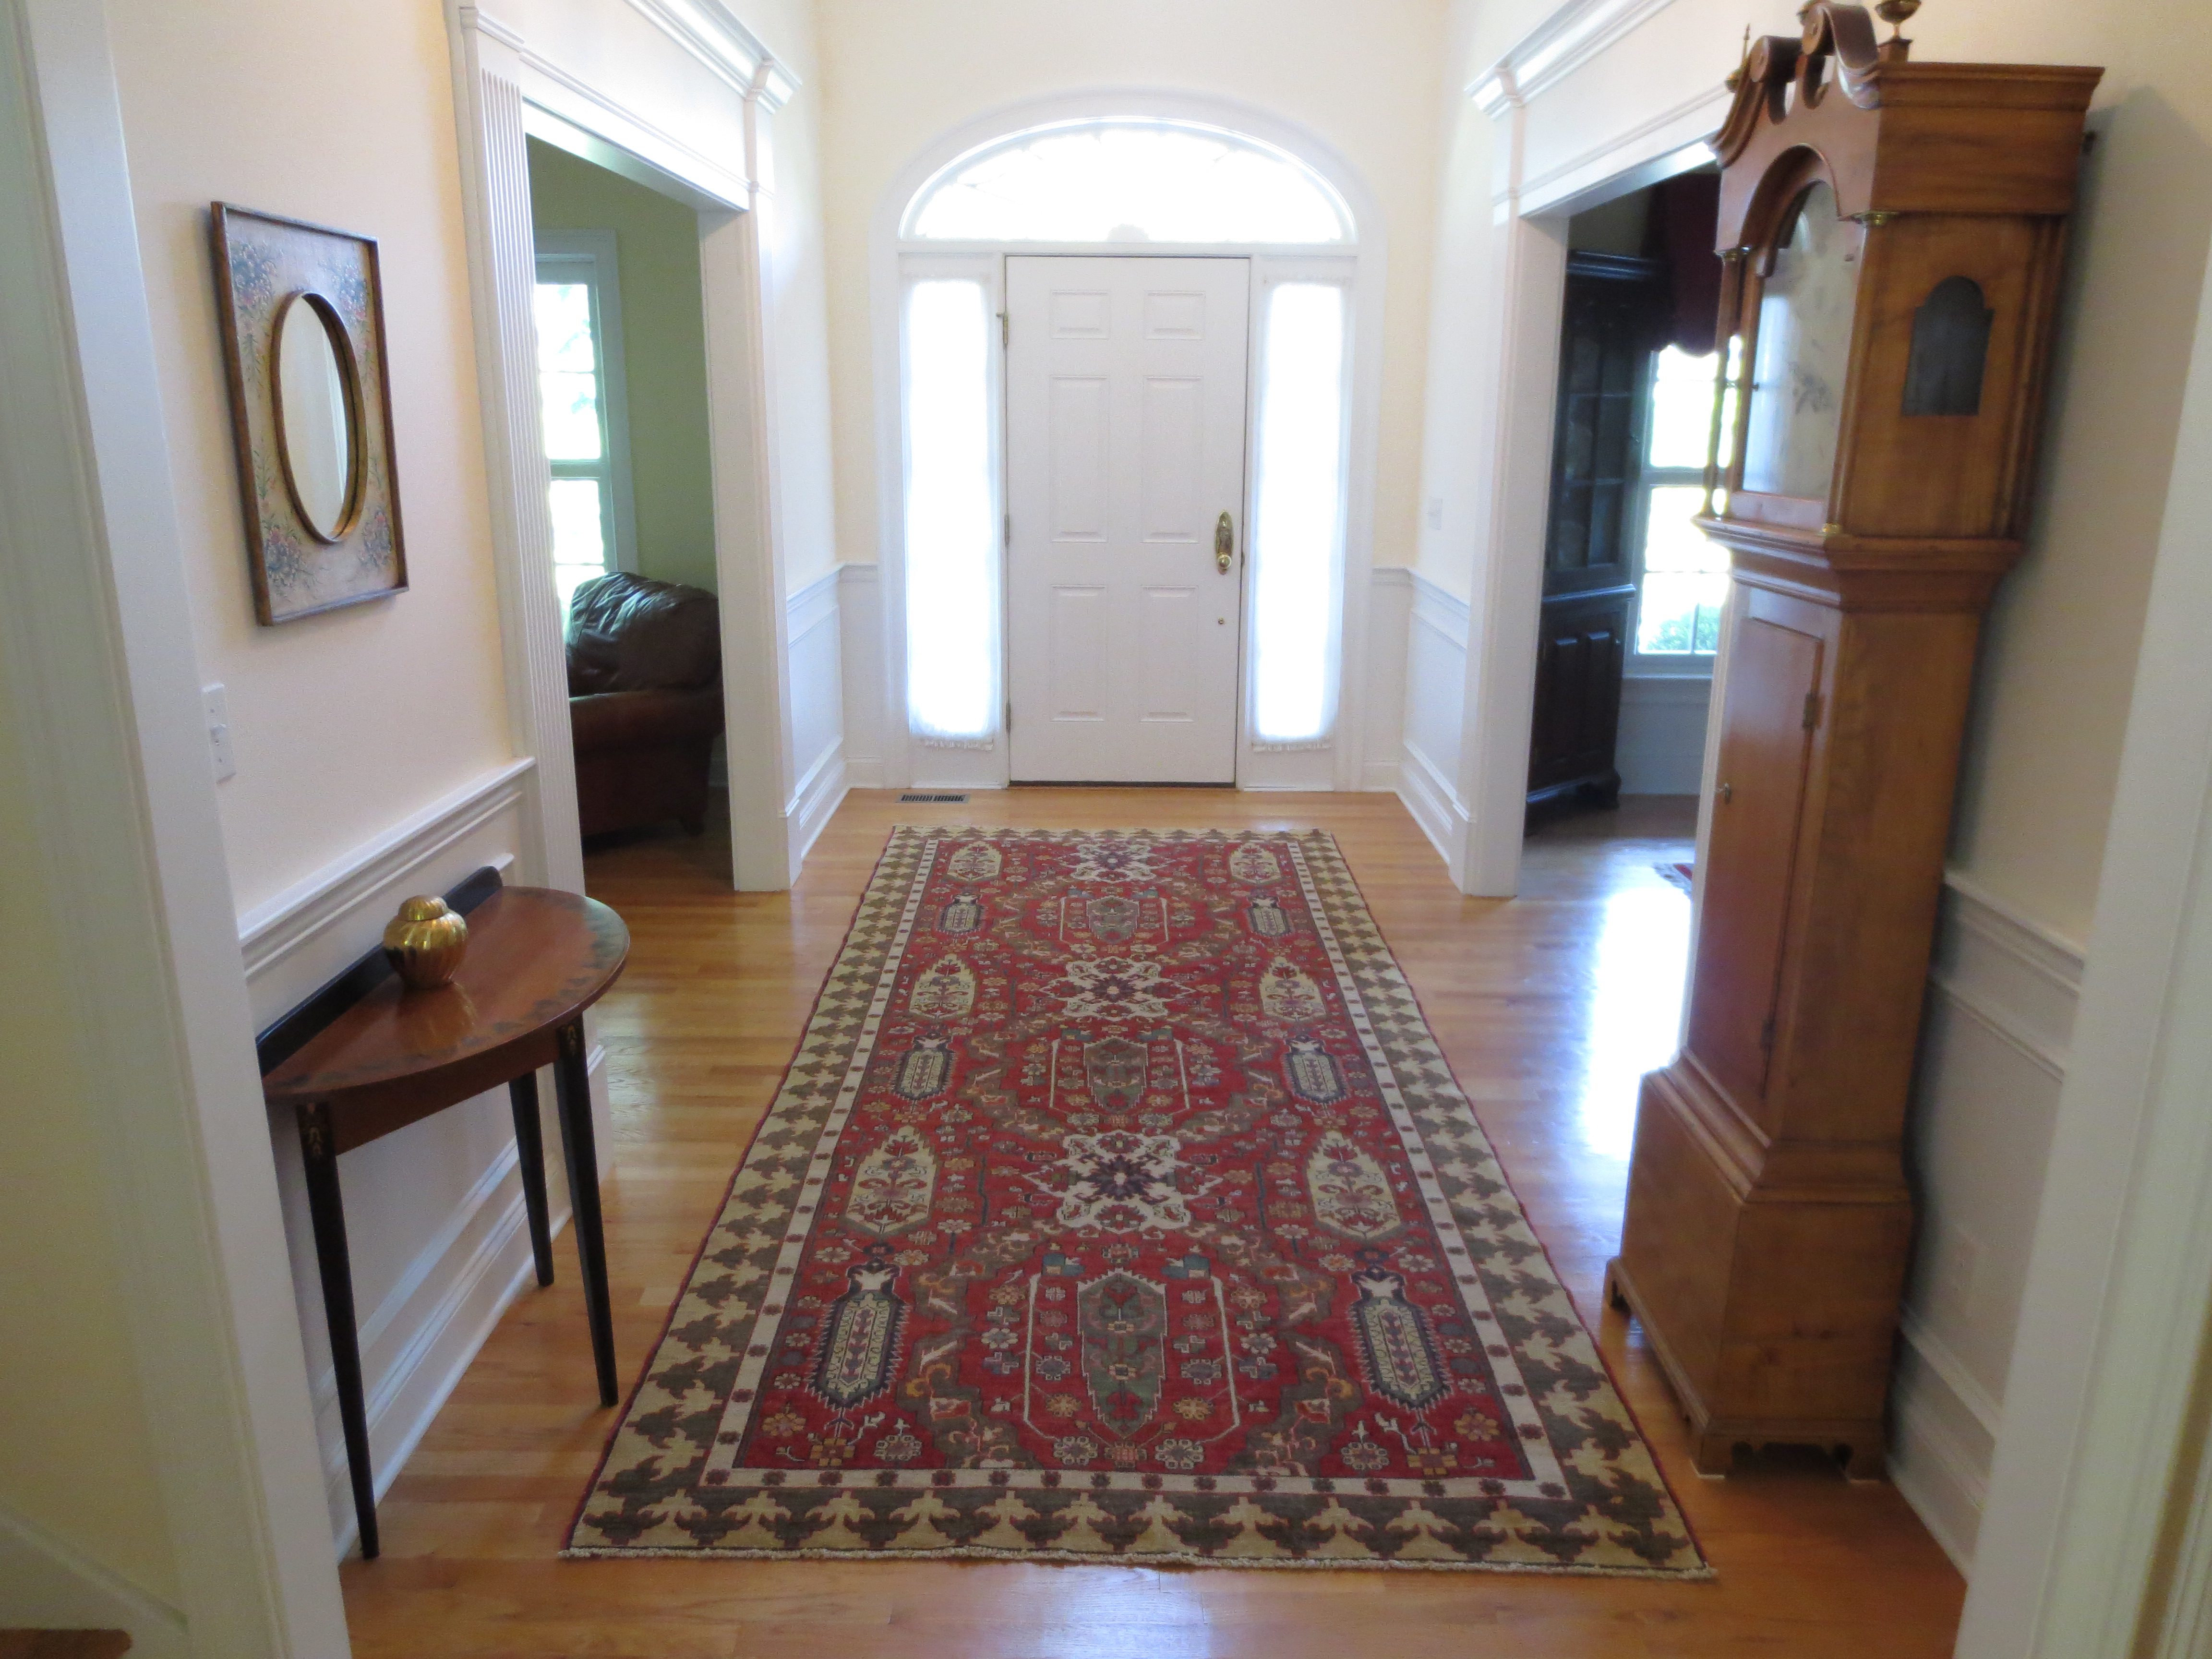 Engaging Entryways – Afghan Dragon Carpet</p>
<div style='display:none;'>
<div class='vcard' id='hcard-'>
<span itemprop='description'><span itemprop='itemreviewed'>Bathroom Mudroom Design</span></span>
<time itemprop='dtreviewed'>2014-08-16T11:00:00-07:00</time>
Rating: <span itemprop='rating'>4.5</span>
Diposkan Oleh: <span class='fn n'>
<span class='given-name' itemprop='reviewer'>Unknown</span>
</span>
</div>
</div>
<div style='clear: both;'></div>
</div>
<div class='post-footer'>
<div class='post-footer-line post-footer-line-1'>
<div class='iklan2'>
</div>
<div id='share-button-bamzstyle'>
<p>Share ke:</p>
<a class='facebook' href='http://www.facebook.com/sharer.php?u=http://menageswingcorno.blogspot.com/2014/08/bathroom-mudroom-design.html&title=Bathroom Mudroom Design' rel='nofollow' style='background:#3b5998;' target='_blank' title='Facebook'>Facebook</a>
<a class='facebook' href='https://plus.google.com/share?url=http://menageswingcorno.blogspot.com/2014/08/bathroom-mudroom-design.html' rel='nofollow' style='background:#c0361a;' target='_blank' title='Google+'>Google+</a>
<a class='twitter' data-text='Bathroom Mudroom Design' data-url='http://menageswingcorno.blogspot.com/2014/08/bathroom-mudroom-design.html' href='http://twitter.com/share' rel='nofollow' style='background:#4099ff;' target='_blank' title='Twitter'>Twitter</a>
<div class='clear'></div>
</div>
<div class='terkait'>
<h3>Designs And Gallery of Bathroom Mudroom Design :</h3>
<script src='/feeds/posts/default/-/bathroom?alt=json-in-script&callback=relpostimgcuplik&max-results=50' type='text/javascript'></script>
<script src='/feeds/posts/default/-/design?alt=json-in-script&callback=relpostimgcuplik&max-results=50' type='text/javascript'></script>
<script src='/feeds/posts/default/-/mudroom?alt=json-in-script&callback=relpostimgcuplik&max-results=50' type='text/javascript'></script>
<ul id='relpost_img_sum'>
<script type='text/javascript'>artikelterkait();</script>
</ul>
<script type='text/javascript'>
removeRelatedDuplicates();
printRelatedLabels();
</script>
</div>
</div>
<div class='post-footer-line post-footer-line-2' style='display:none;'></div>
<div class='post-footer-line post-footer-line-3' style='display:none;'></div>
</div>
</div>
<div class='comments' id='comments'>
<a name='comments'></a>
<h4>
0
comments:
        
</h4>
<div id='Blog1_comments-block-wrapper'>
<dl class='avatar-comment-indent' id='comments-block'>
</dl>
</div>
<p class='comment-footer'>
<div class='comment-form'>
<a name='comment-form'></a>
<h4 id='comment-post-message'>Post a Comment</h4>
<p>
</p>
<a href='https://www.blogger.com/comment/frame/7822206320688067681?po=6127322577036248046&hl=en' id='comment-editor-src'></a>
<iframe allowtransparency='true' class='blogger-iframe-colorize blogger-comment-from-post' frameborder='0' height='410' id='comment-editor' name='comment-editor' src='' width='100%'></iframe>
<!--Can't find substitution for tag [post.friendConnectJs]-->
<script src='https://www.blogger.com/static/v1/jsbin/4269703388-comment_from_post_iframe.js' type='text/javascript'></script>
<script type='text/javascript'>
      BLOG_CMT_createIframe('https://www.blogger.com/rpc_relay.html', '0');
    </script>
</div>
</p>
<div id='backlinks-container'>
<div id='Blog1_backlinks-container'>
</div>
</div>
</div>
</div>

        </div></div>
      
<!--Can't find substitution for tag [adEnd]-->
</div>
<div class='blog-pager' id='blog-pager'>
<span id='blog-pager-newer-link'>
<a class='blog-pager-newer-link' href='http://menageswingcorno.blogspot.com/2014/08/edge-design-bathroom-mural.html' id='Blog1_blog-pager-newer-link' title='Newer Post'>Newer Post</a>
</span>
<span id='blog-pager-older-link'>
<a class='blog-pager-older-link' href='http://menageswingcorno.blogspot.com/2014/08/bathroom-design-mumbai.html' id='Blog1_blog-pager-older-link' title='Older Post'>Older Post</a>
</span>
<a class='home-link' href='http://menageswingcorno.blogspot.com/'>Home</a>
</div>
<div class='clear'></div>
<div class='post-feeds'>
<div class='feed-links'>
Subscribe to:
<a class='feed-link' href='http://menageswingcorno.blogspot.com/feeds/6127322577036248046/comments/default' target='_blank' type='application/atom+xml'>Post Comments (Atom)</a>
</div>
</div>
</div></div>
</div>
<div id='sidebar-wrapper'>
<div id='search-box'>
<form action='/search' id='search-form' method='get' target='_top'>
<input id='search-text' name='q' onblur='if (this.value == 